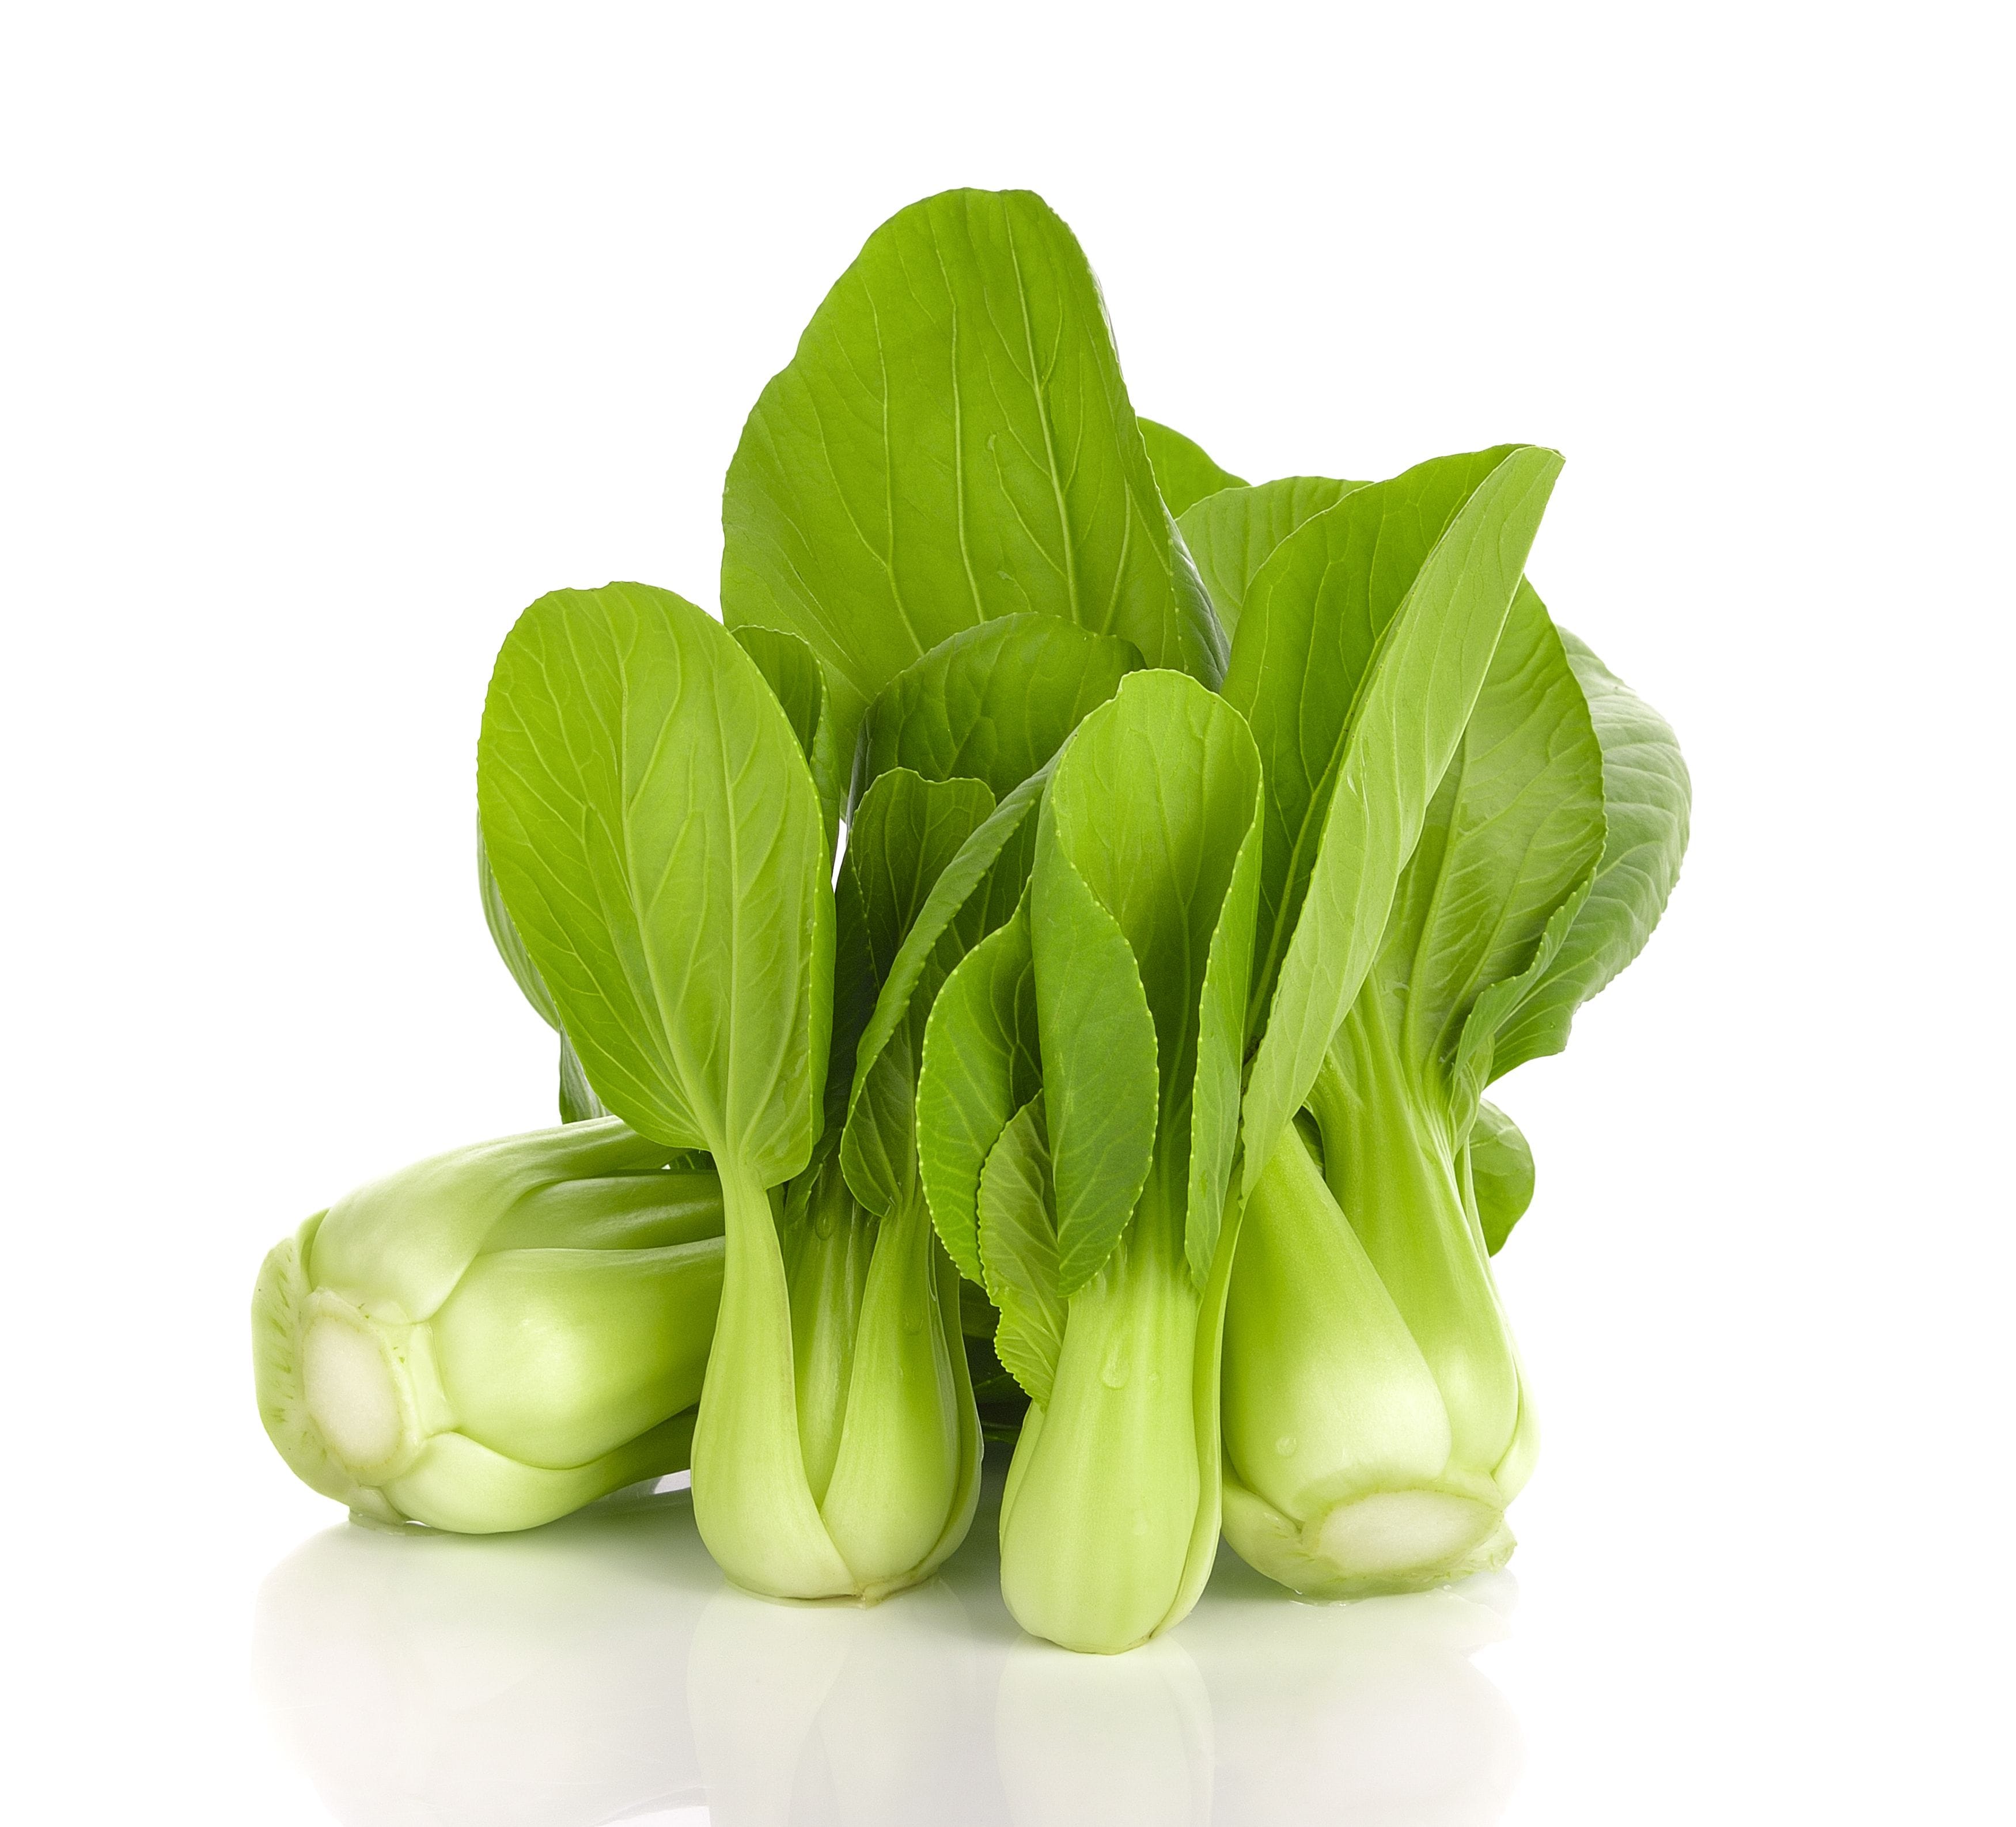 Use pak choy baby leaves in salads or stir-fry mature leaves and stems